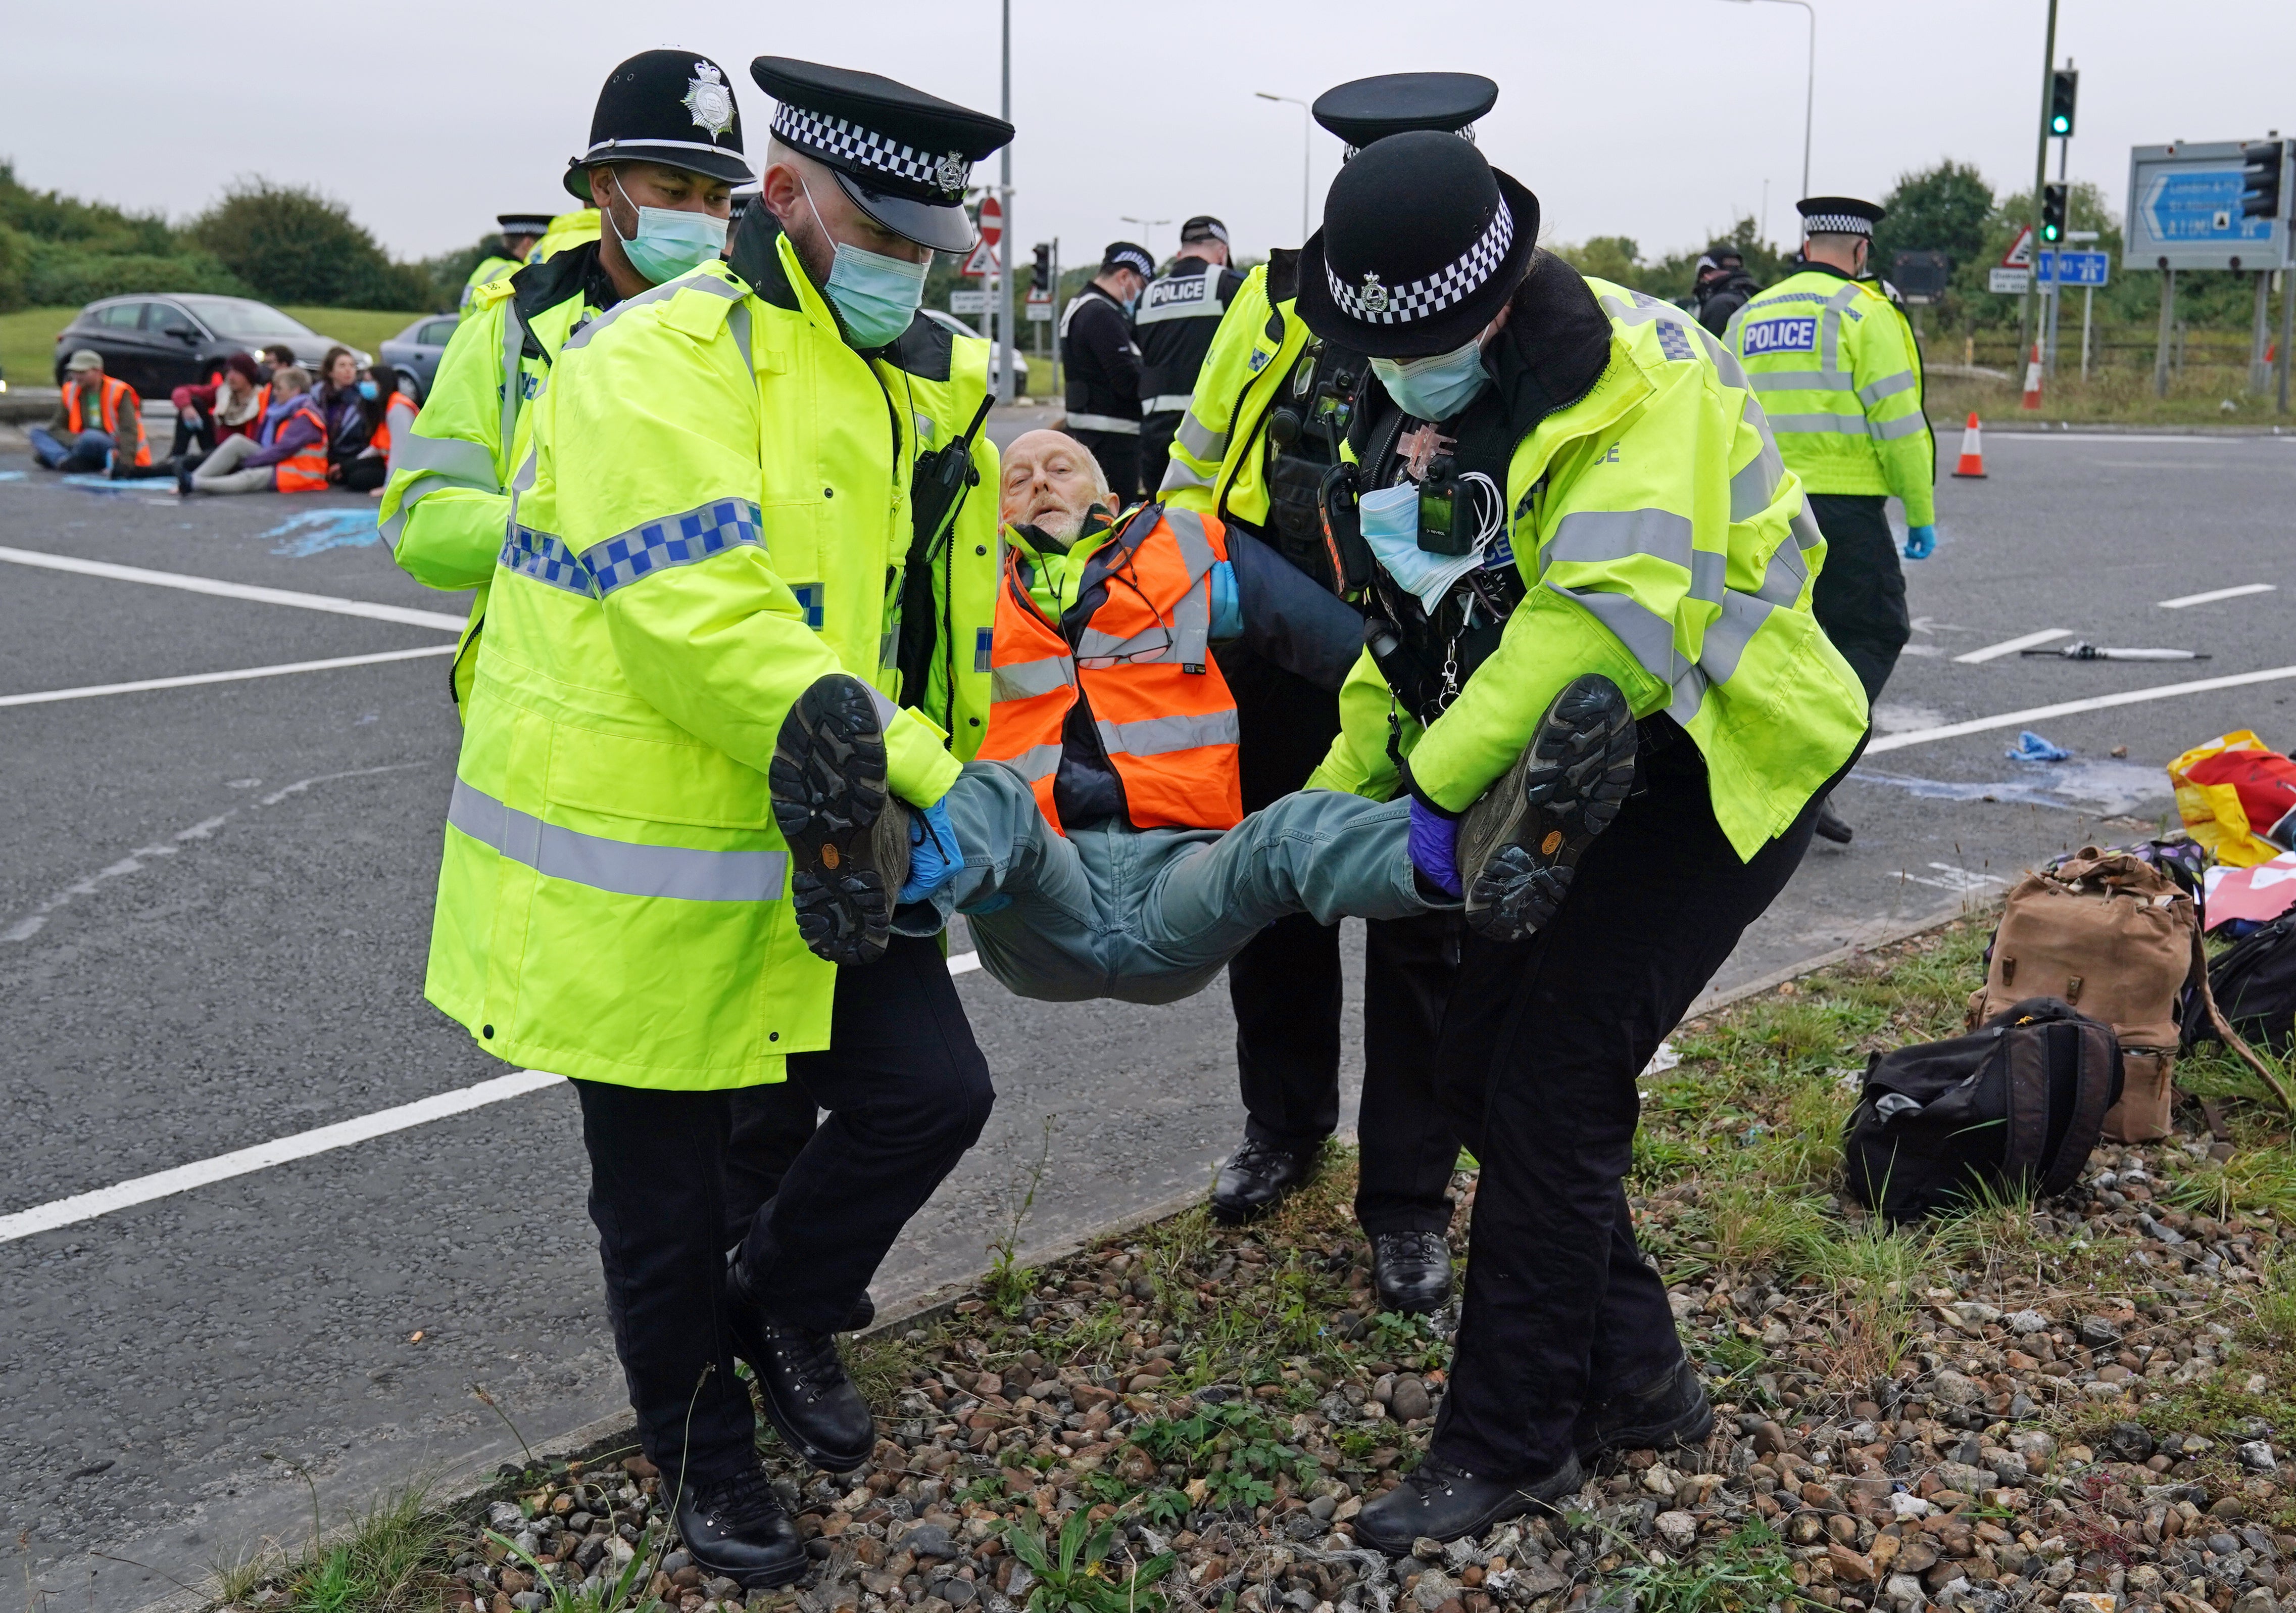 Police officers carry away an Insulate Britain protester who had glued himself to the highway at a slip road at Junction 4 of the A1(M), near Hatfield